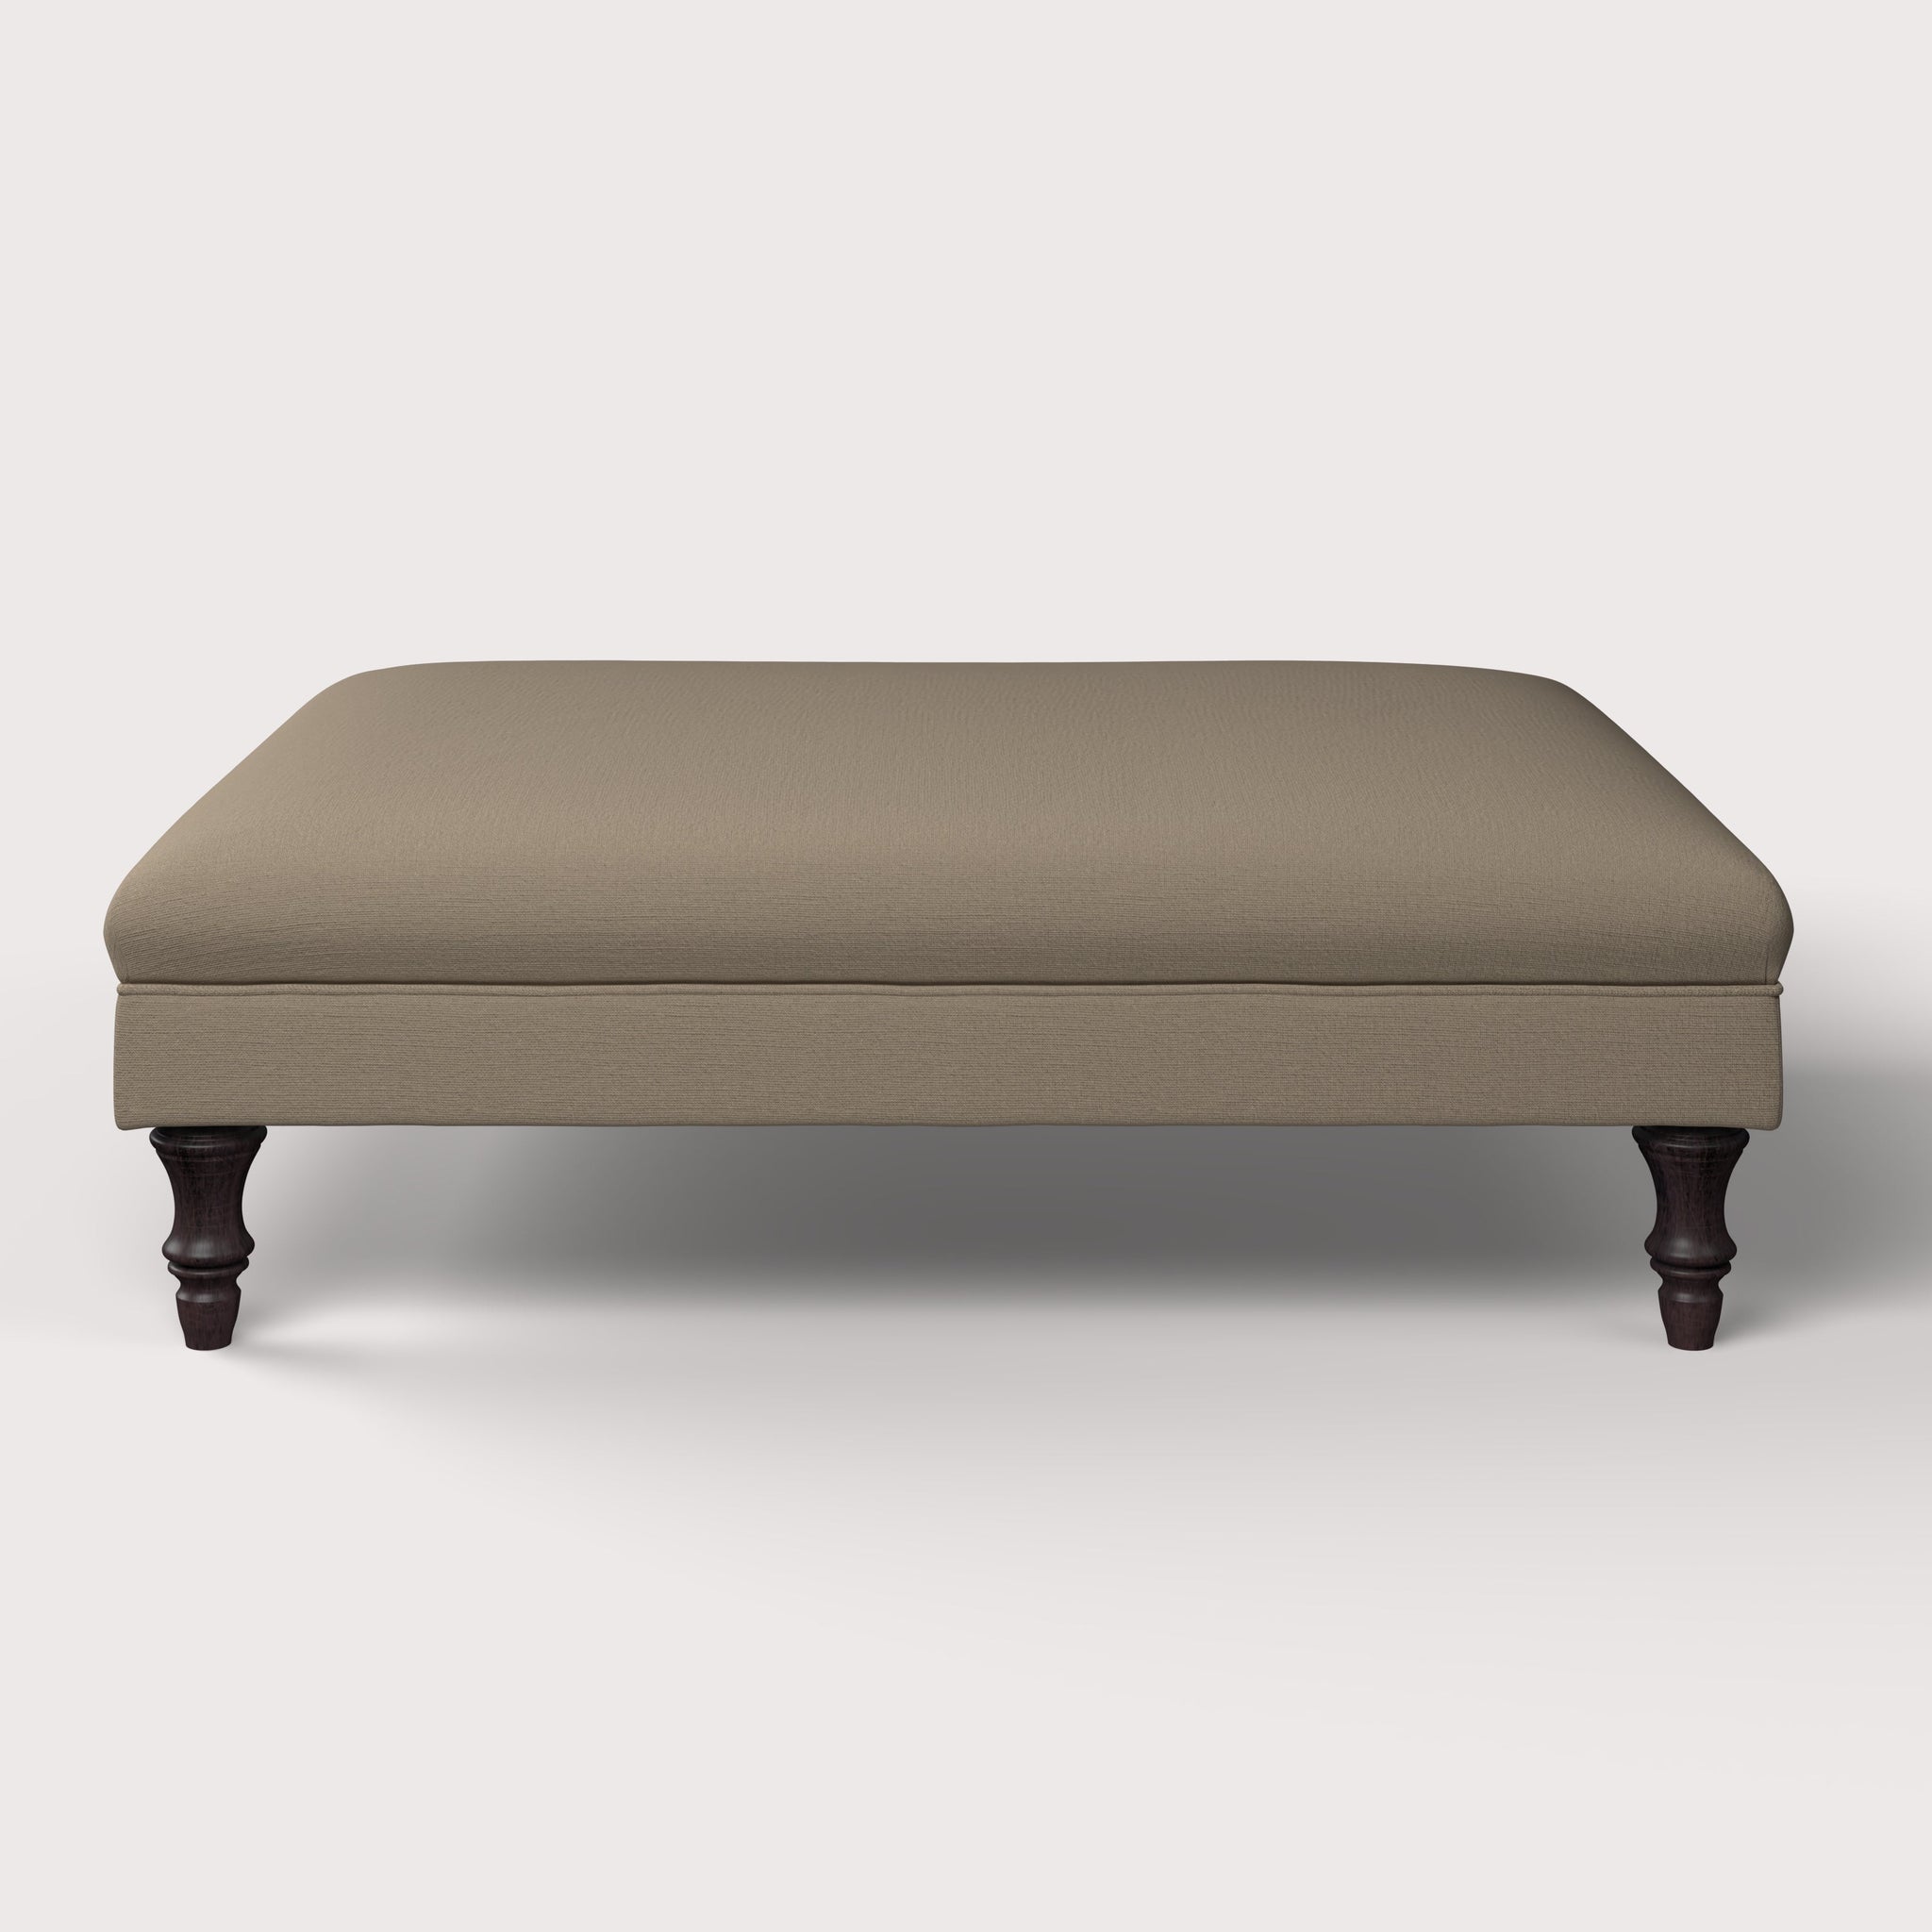 The Potter Footstool - Large